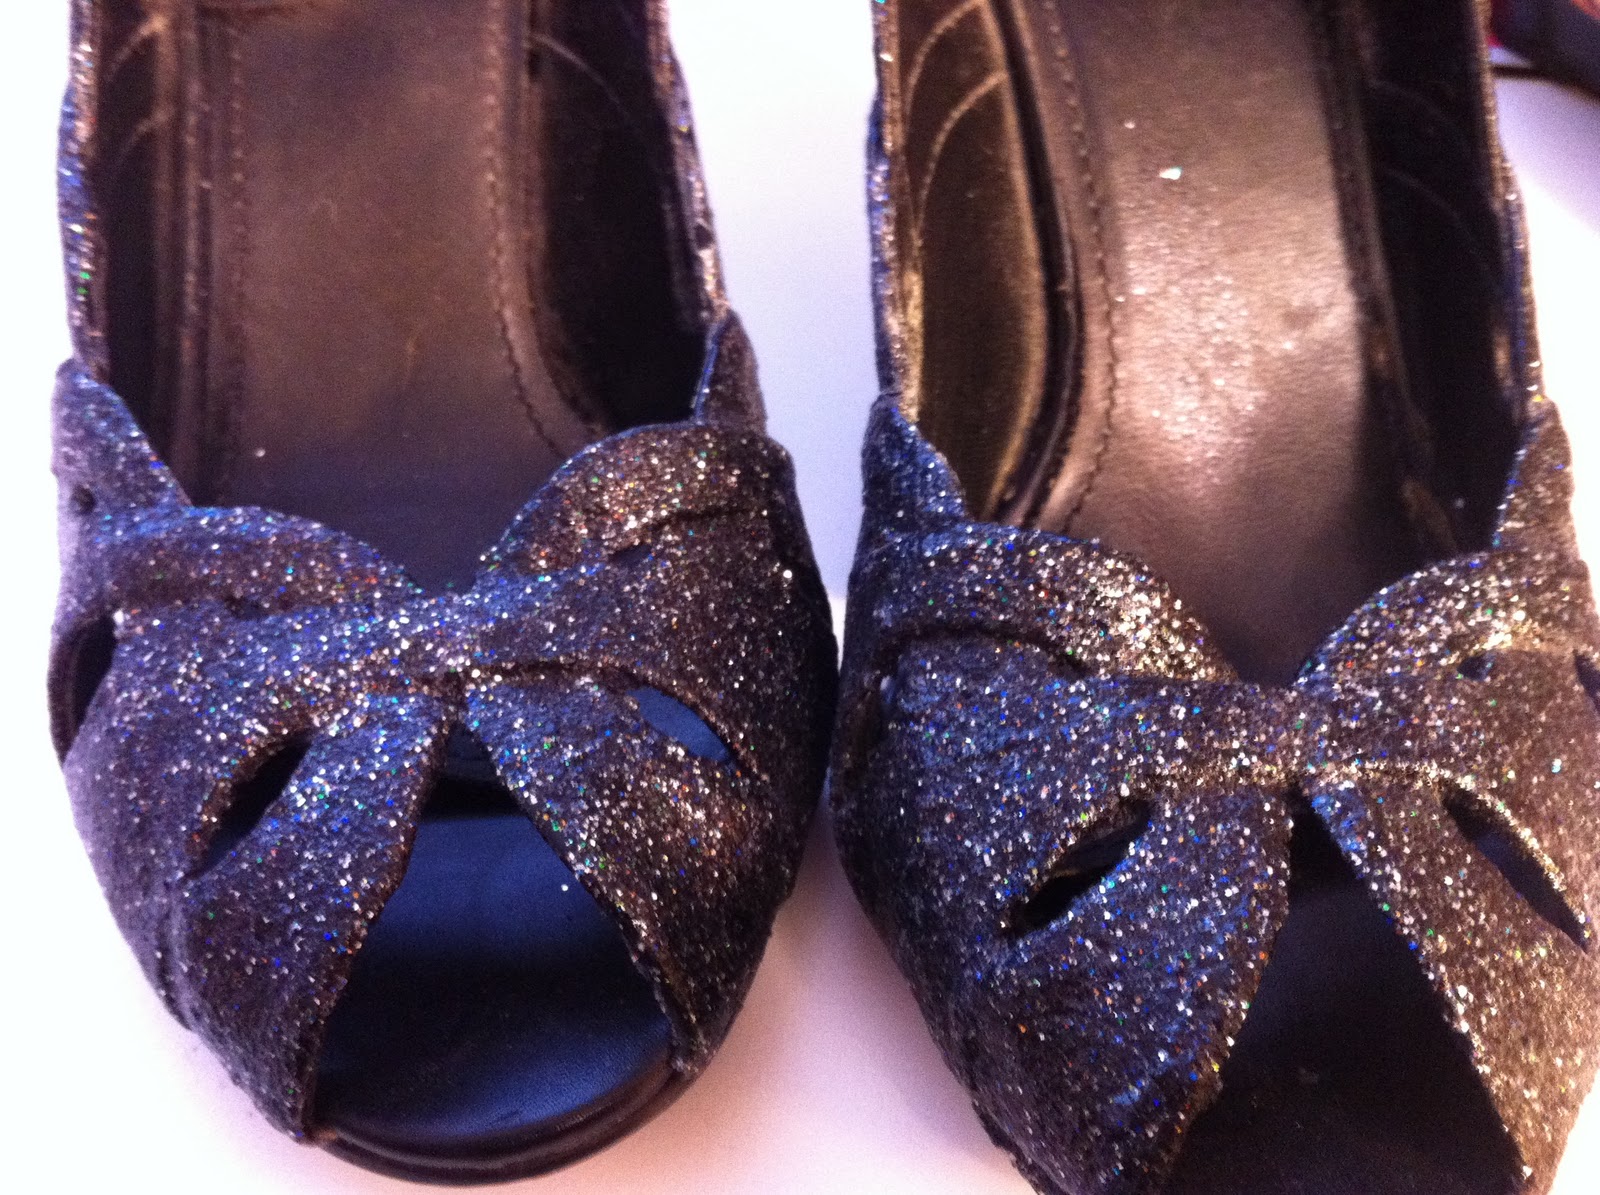 Want to get Crafty?: Glitter Shoes